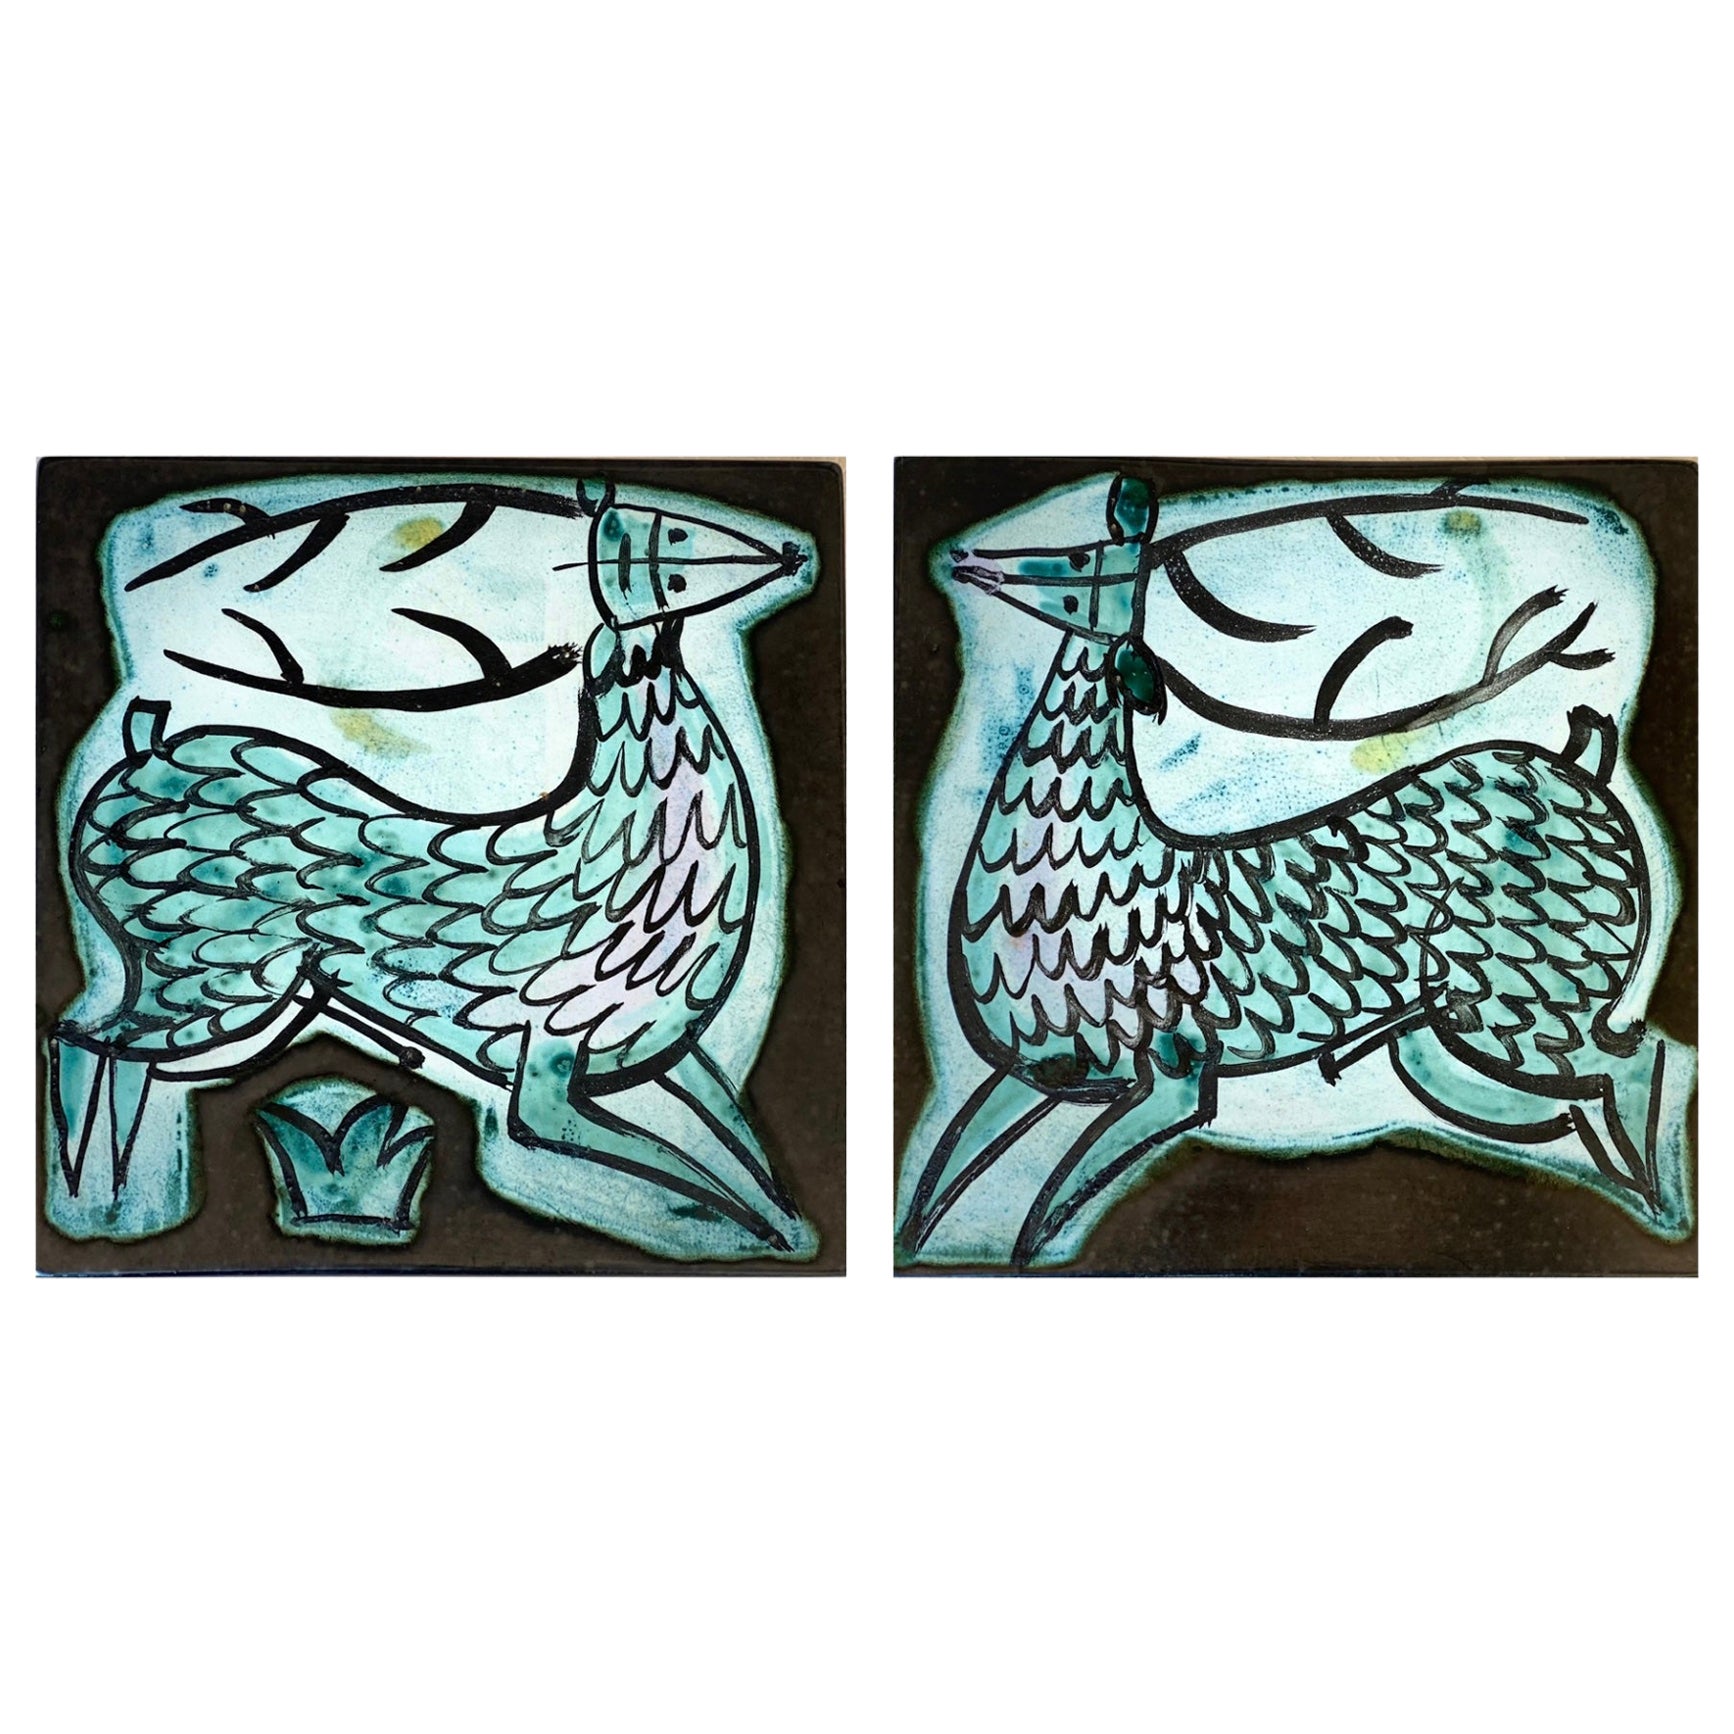 Georges Jouve Pair of "Deers" Ceramic Plates, 1950s For Sale